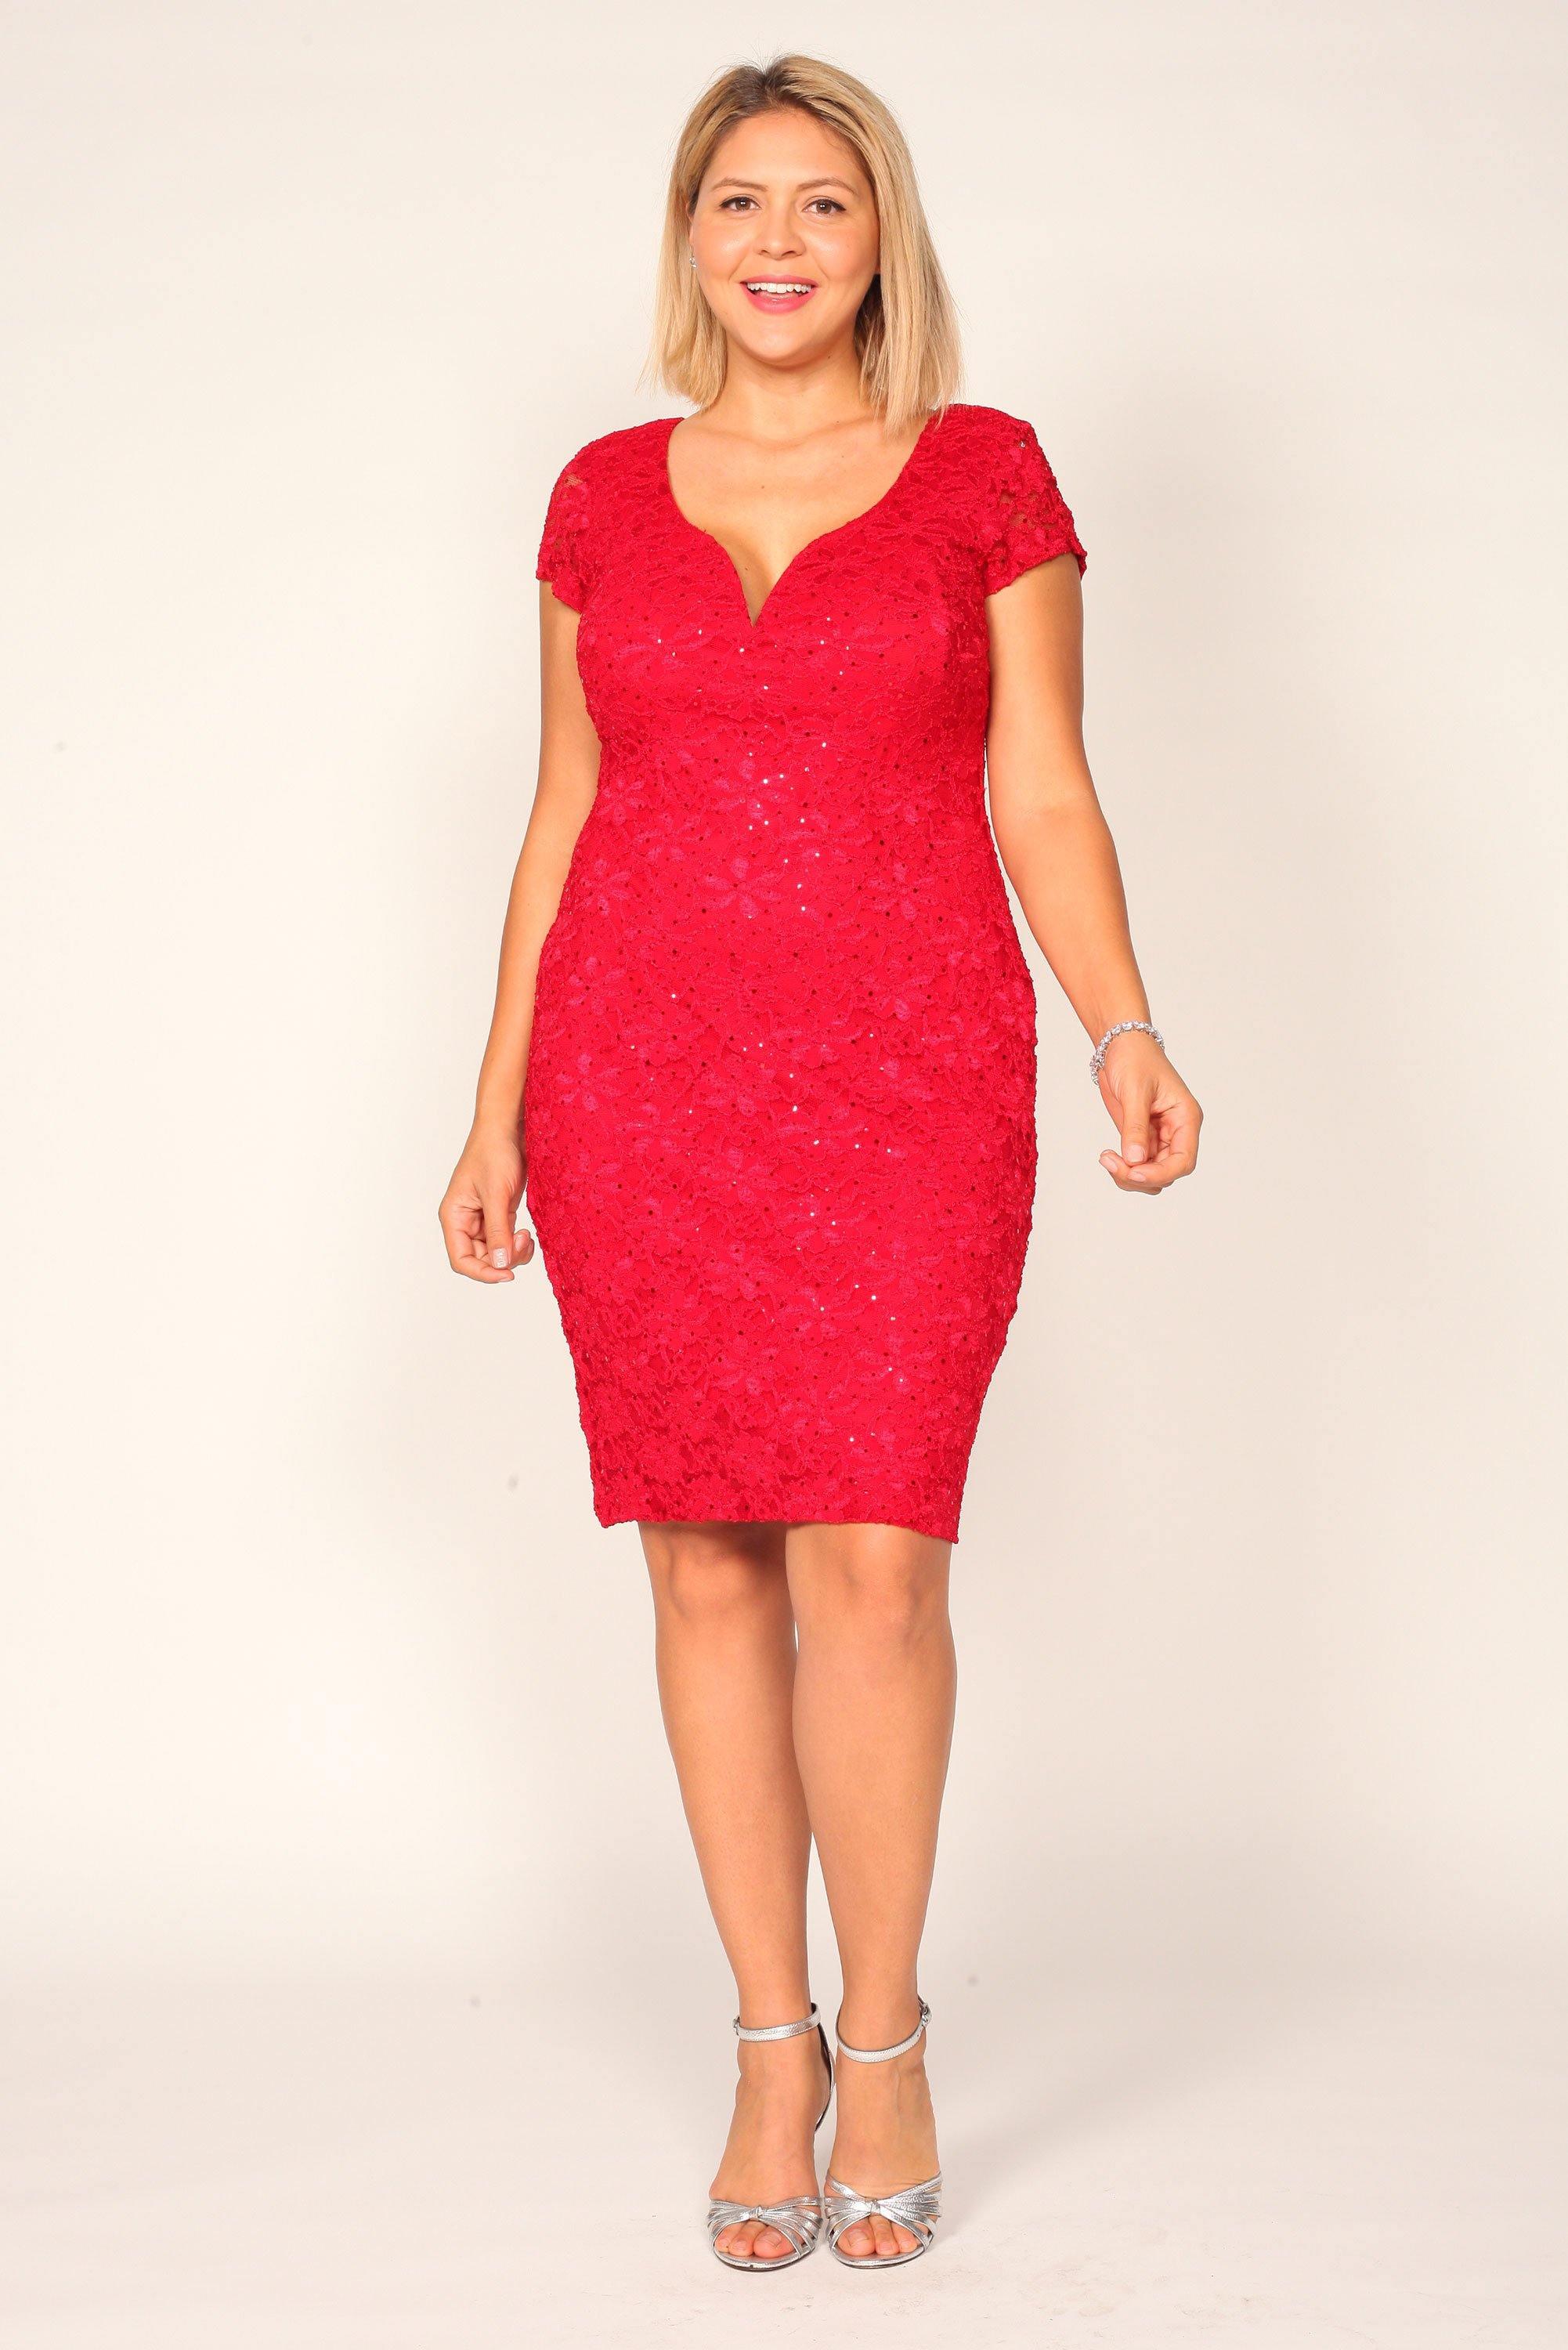 Connected Apparel Short Formal Lace Dress Cocktail Sale - The Dress Outlet